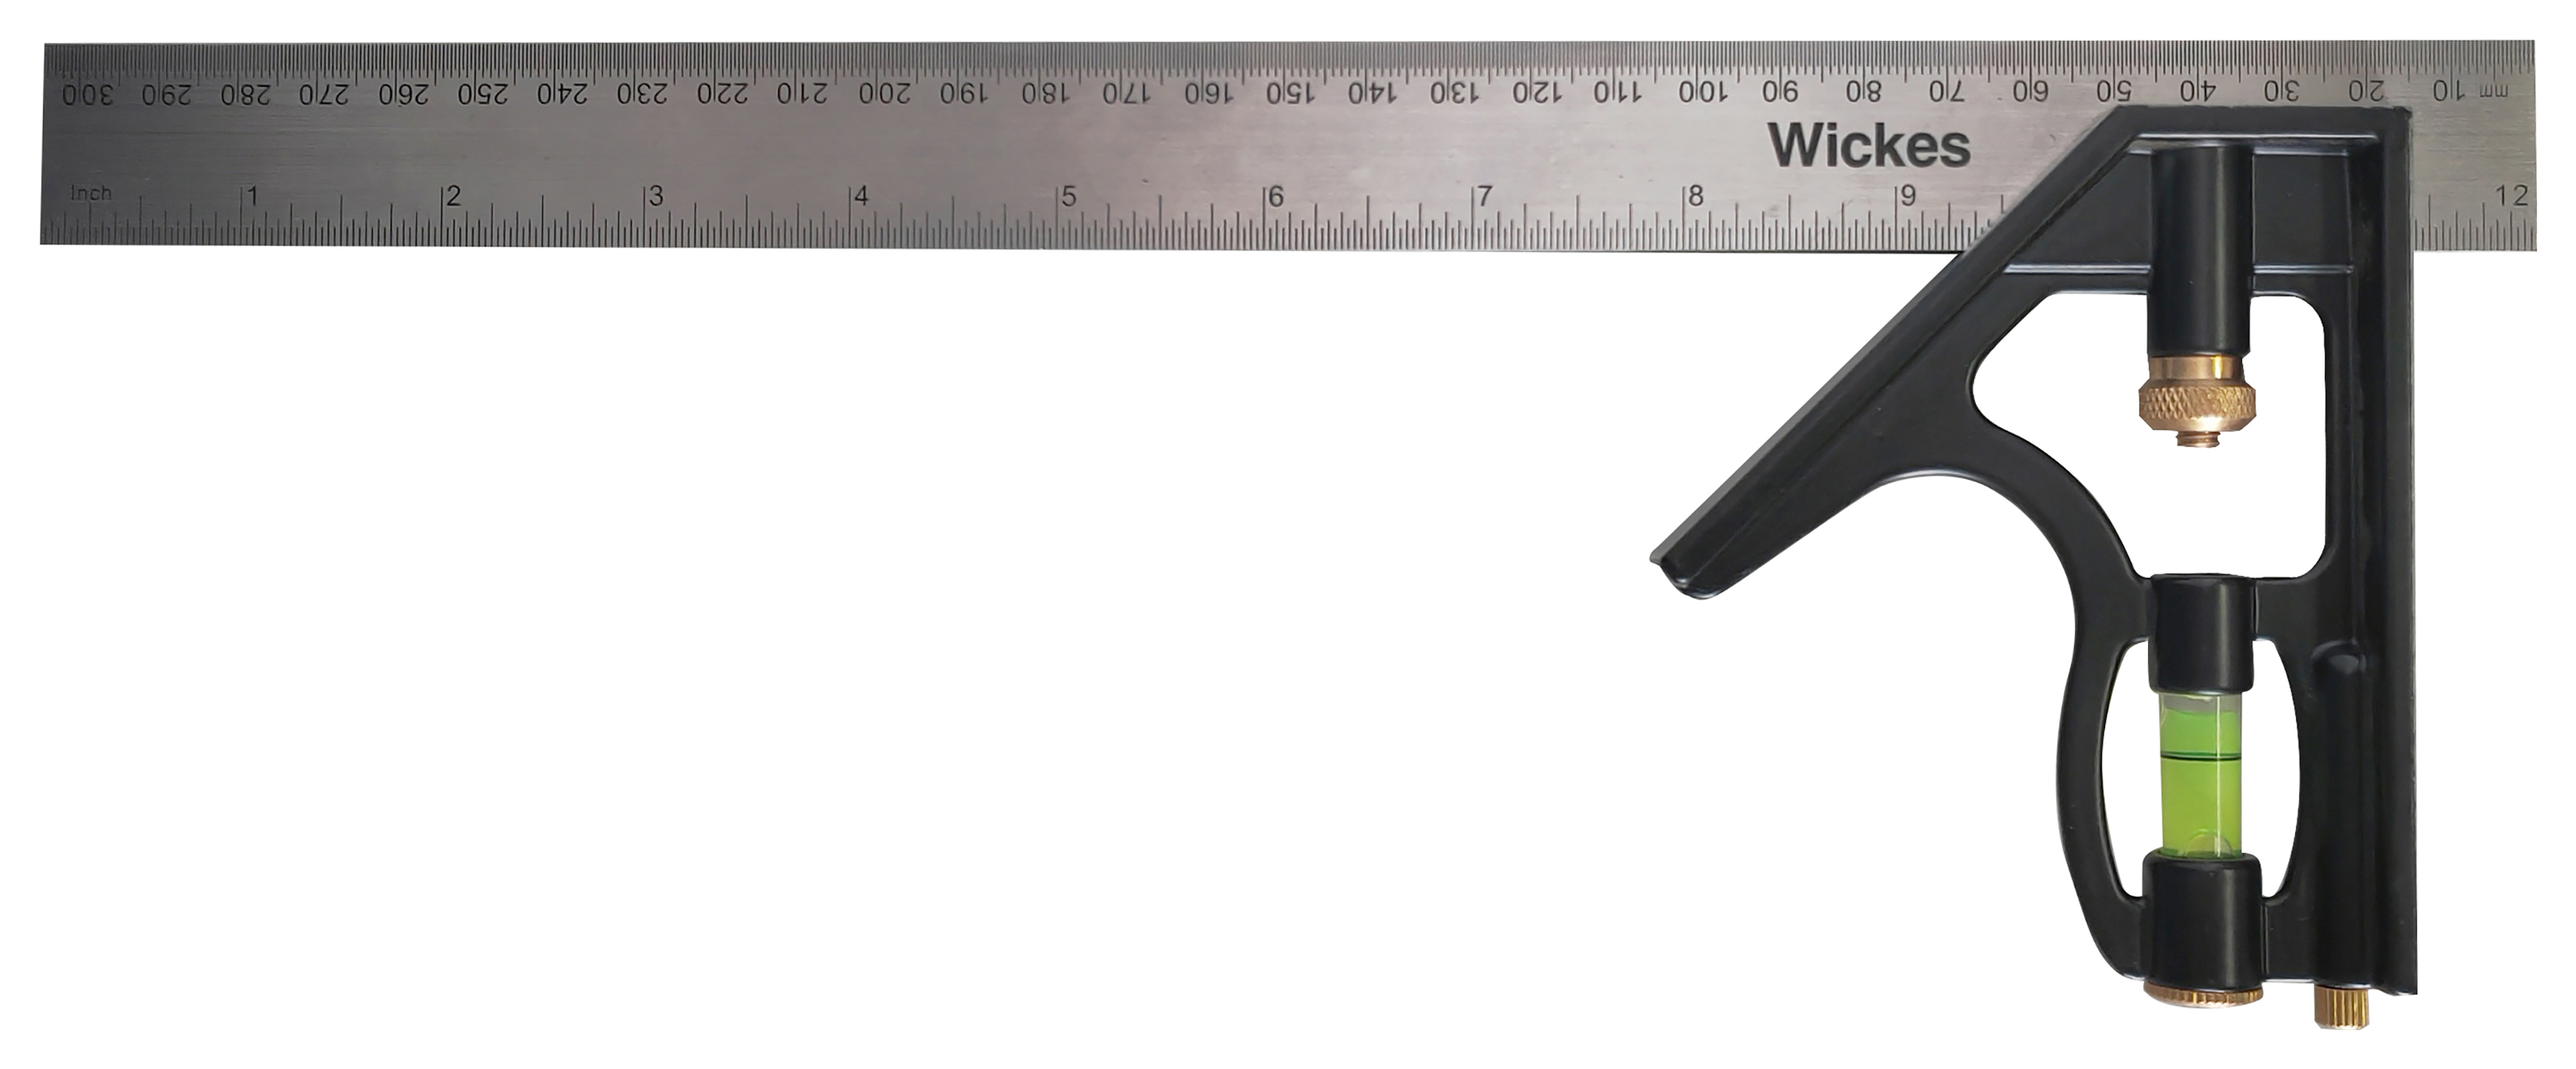 Image of Wickes Steel Combination Square - 12in/300mm